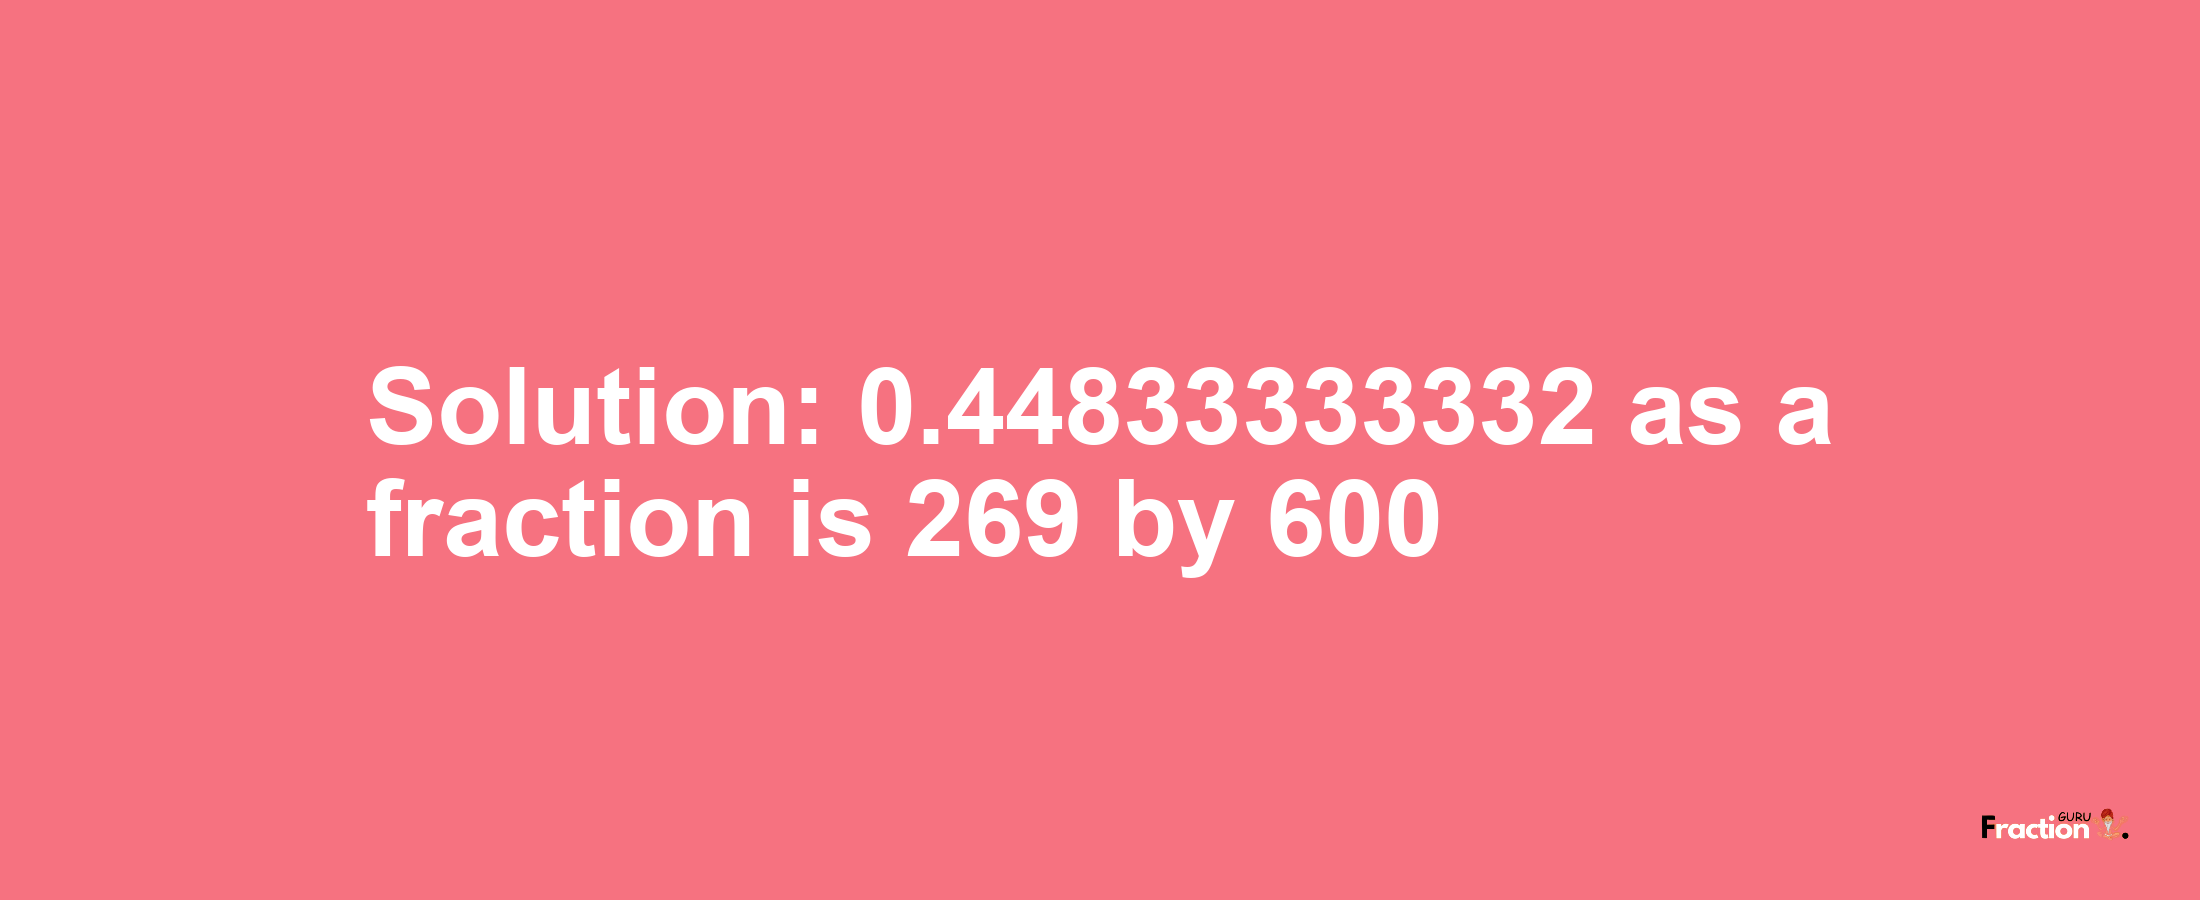 Solution:0.44833333332 as a fraction is 269/600